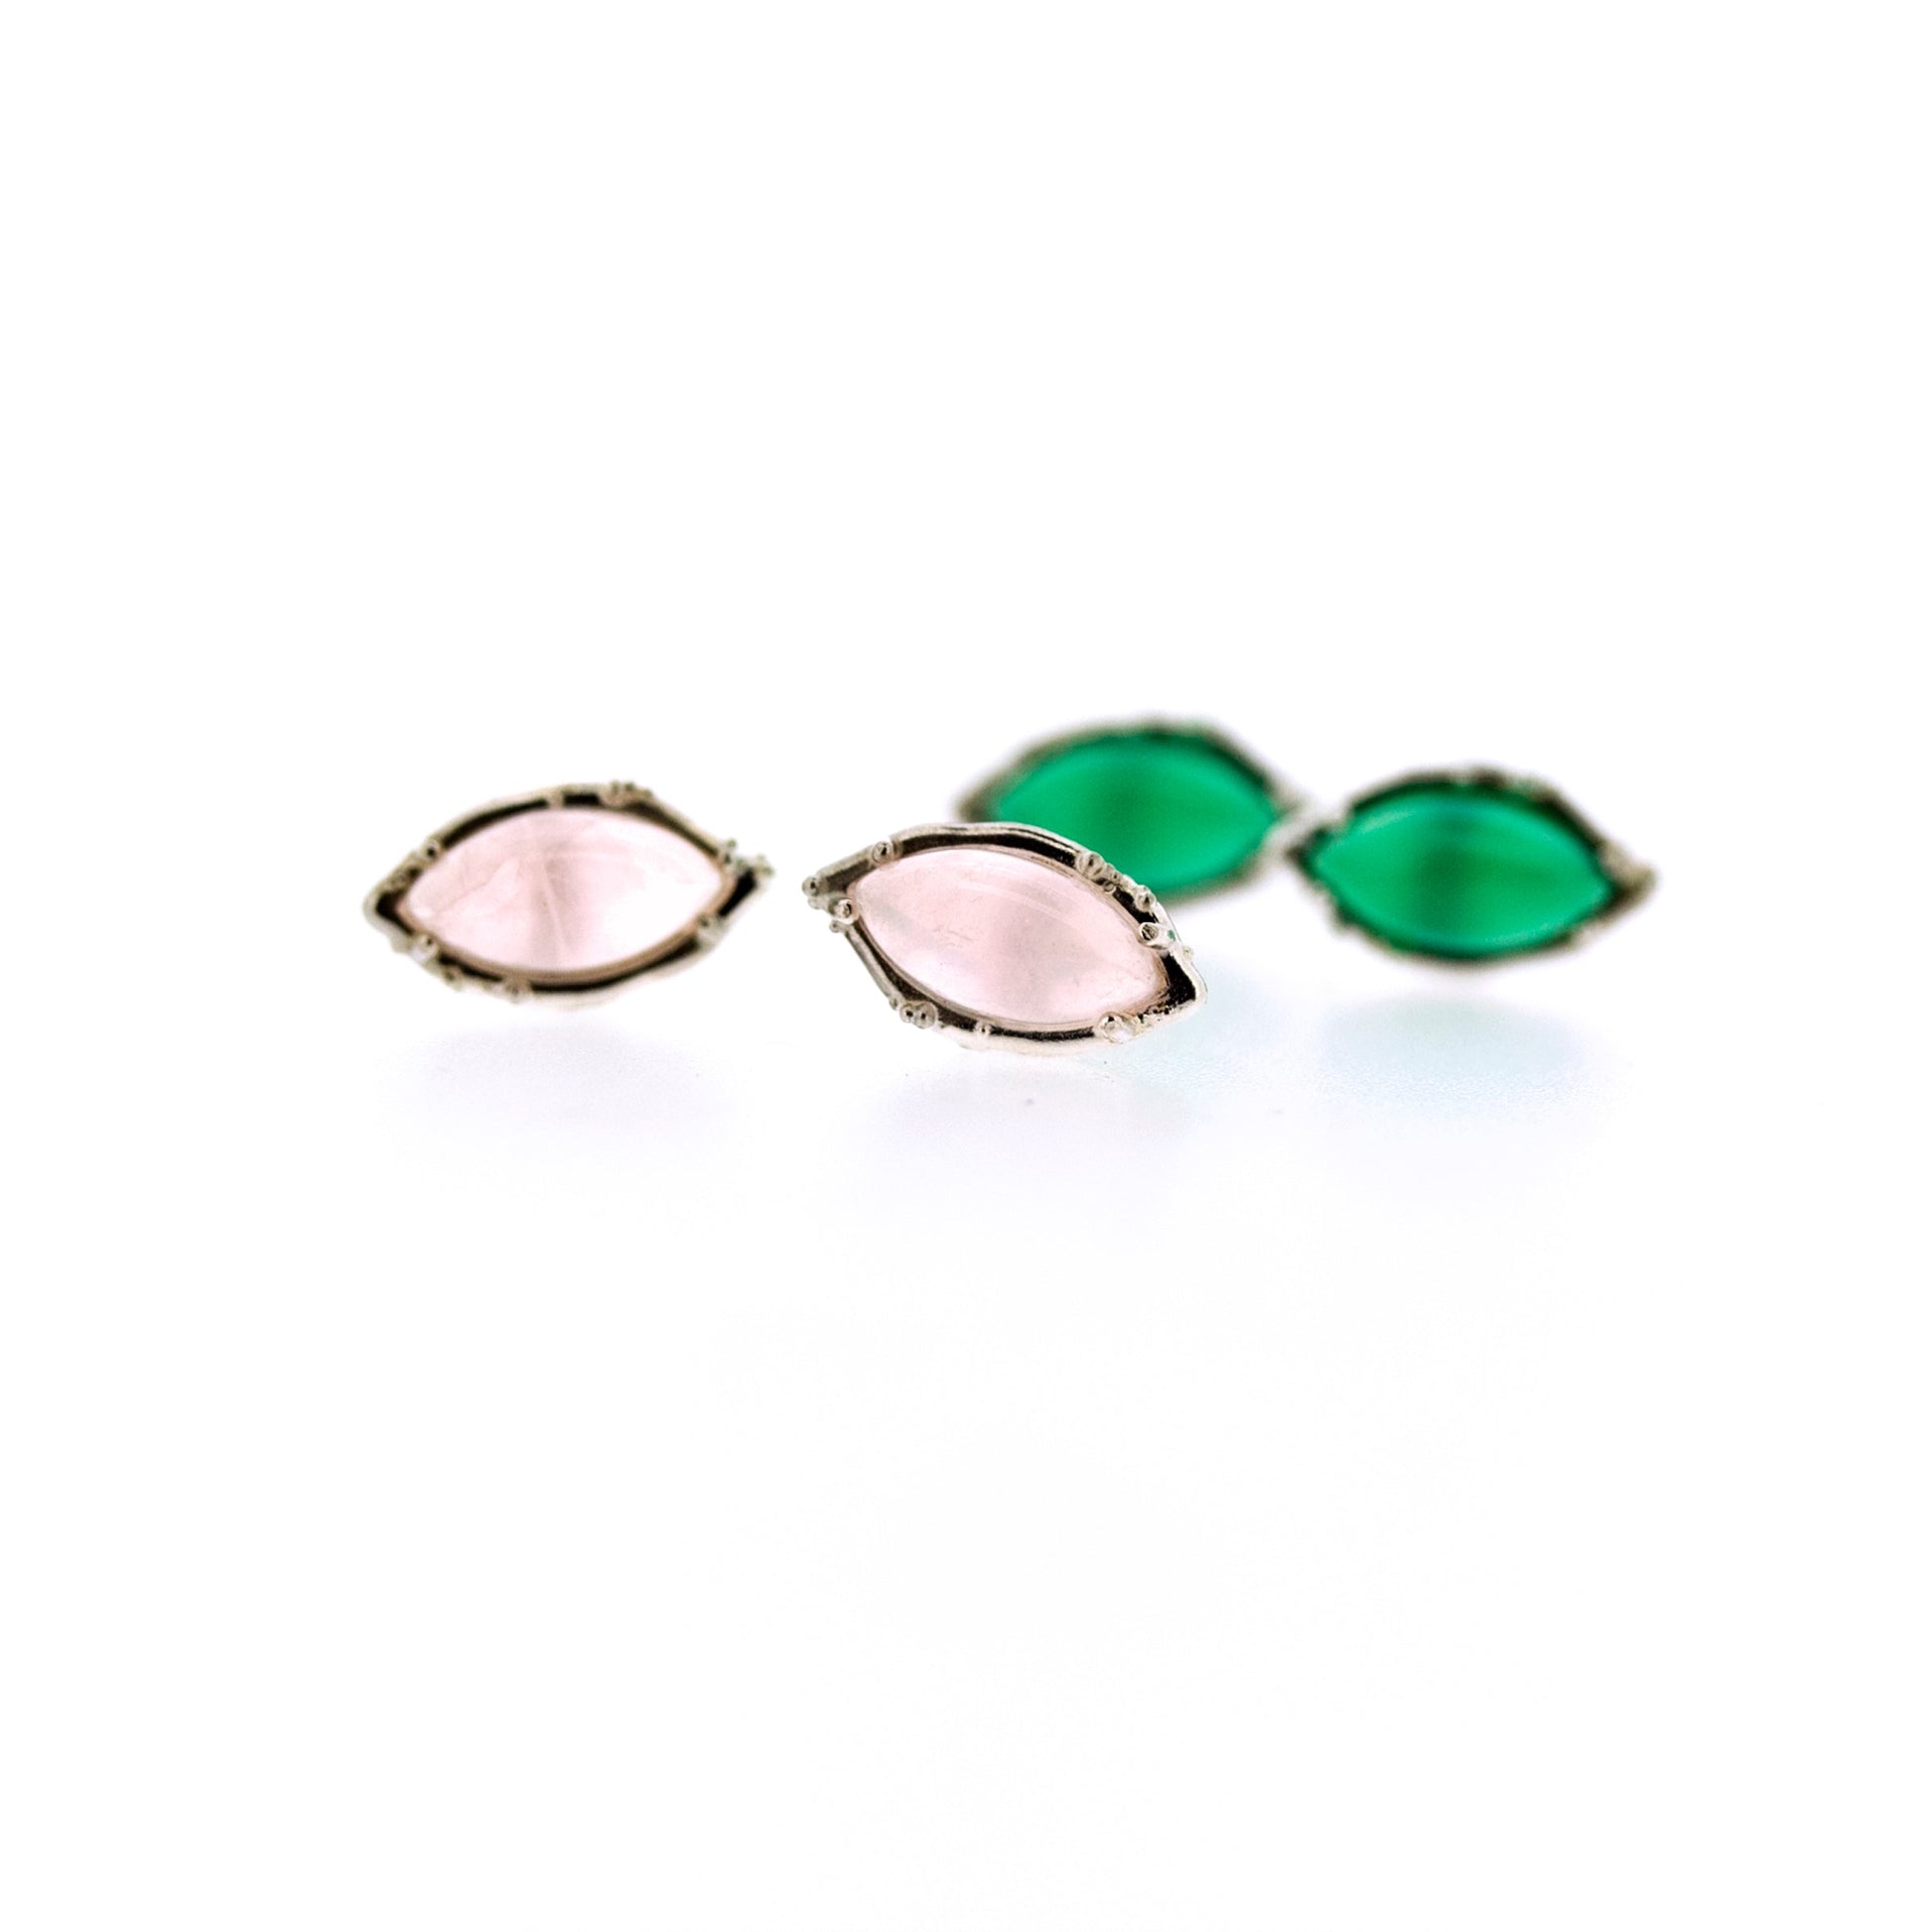 Full view of Rosa - Rose Quartz and Green Onyx earrings one stacked in front of the other.